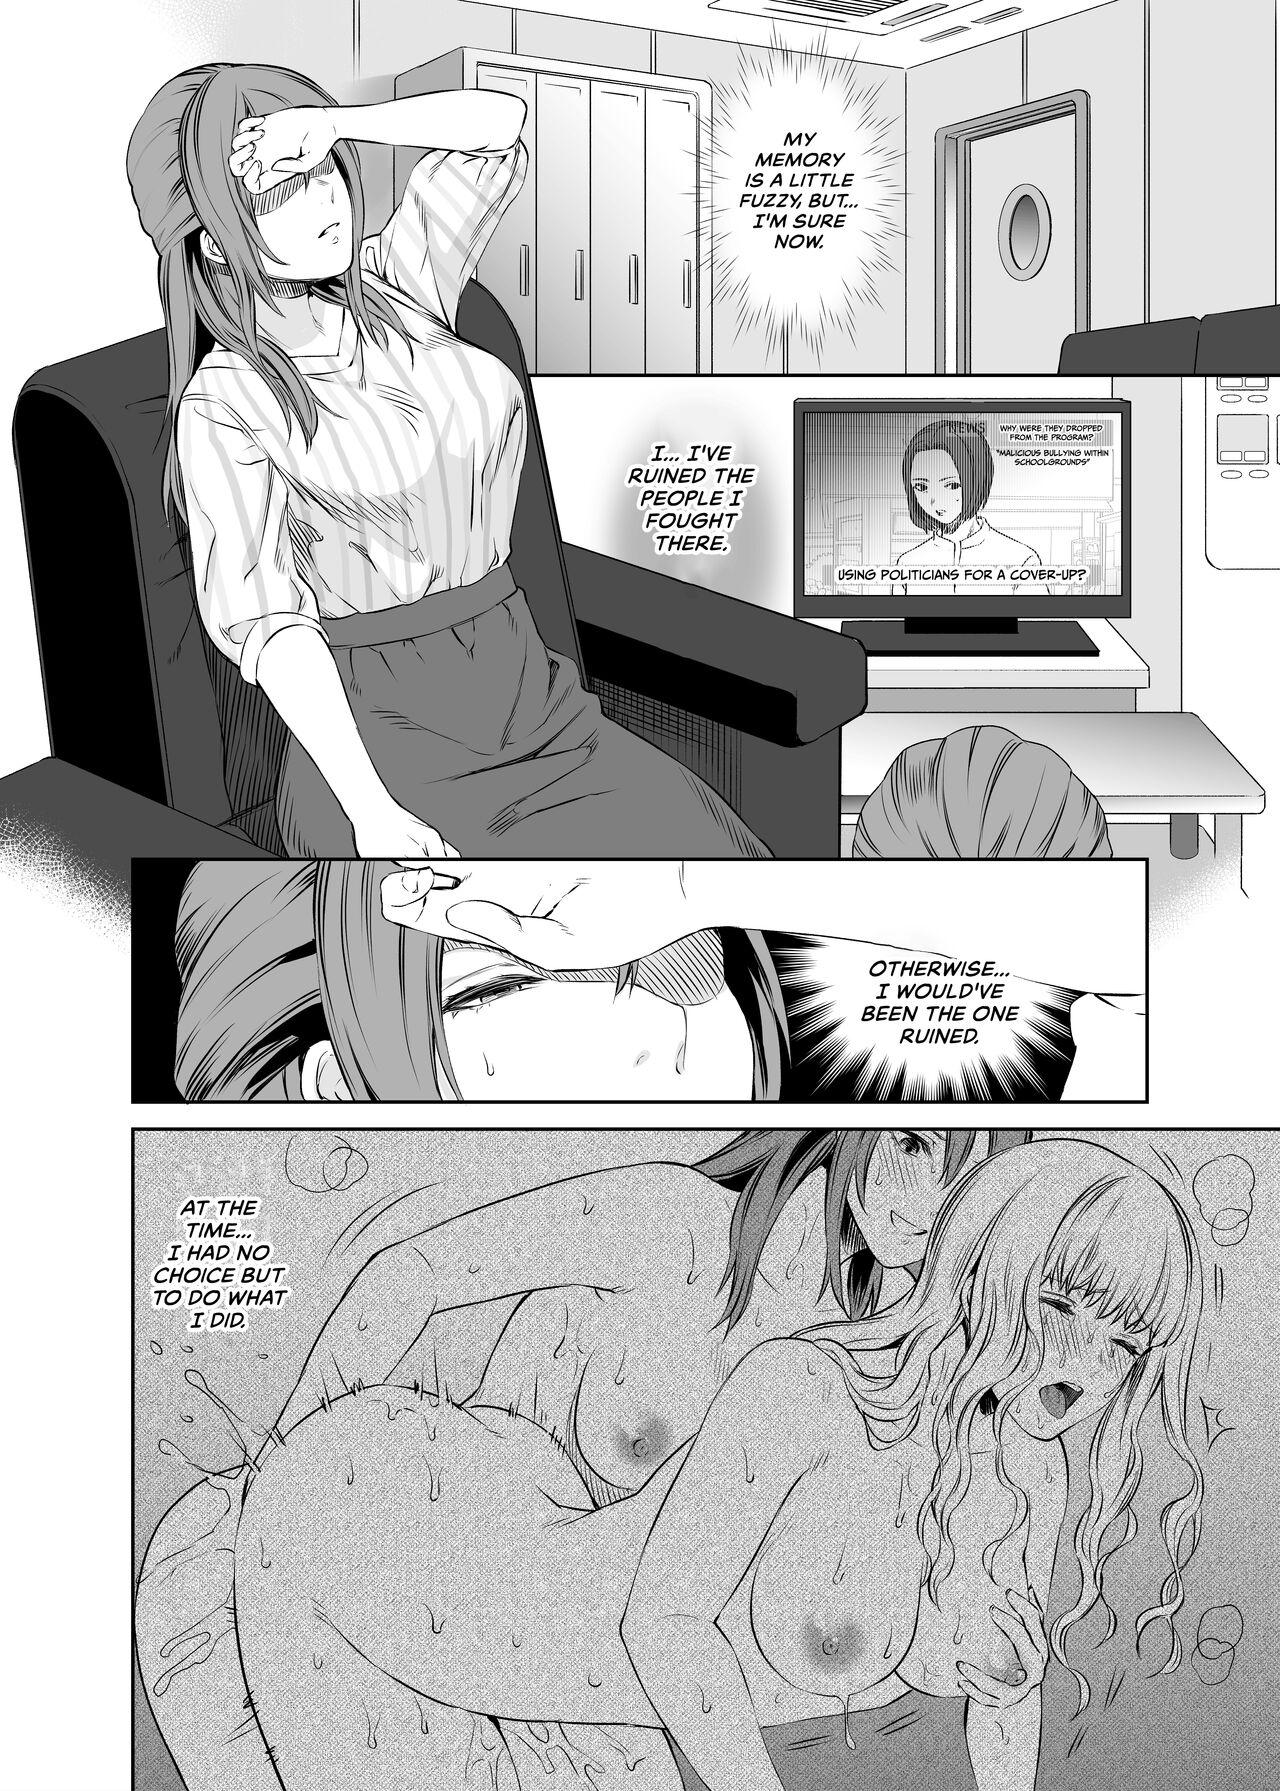 Monster Dick [Remora Works (Meriko)] LesFes Co -Candid Reporting- Vol. 003 [English] - Original Africa - Page 5